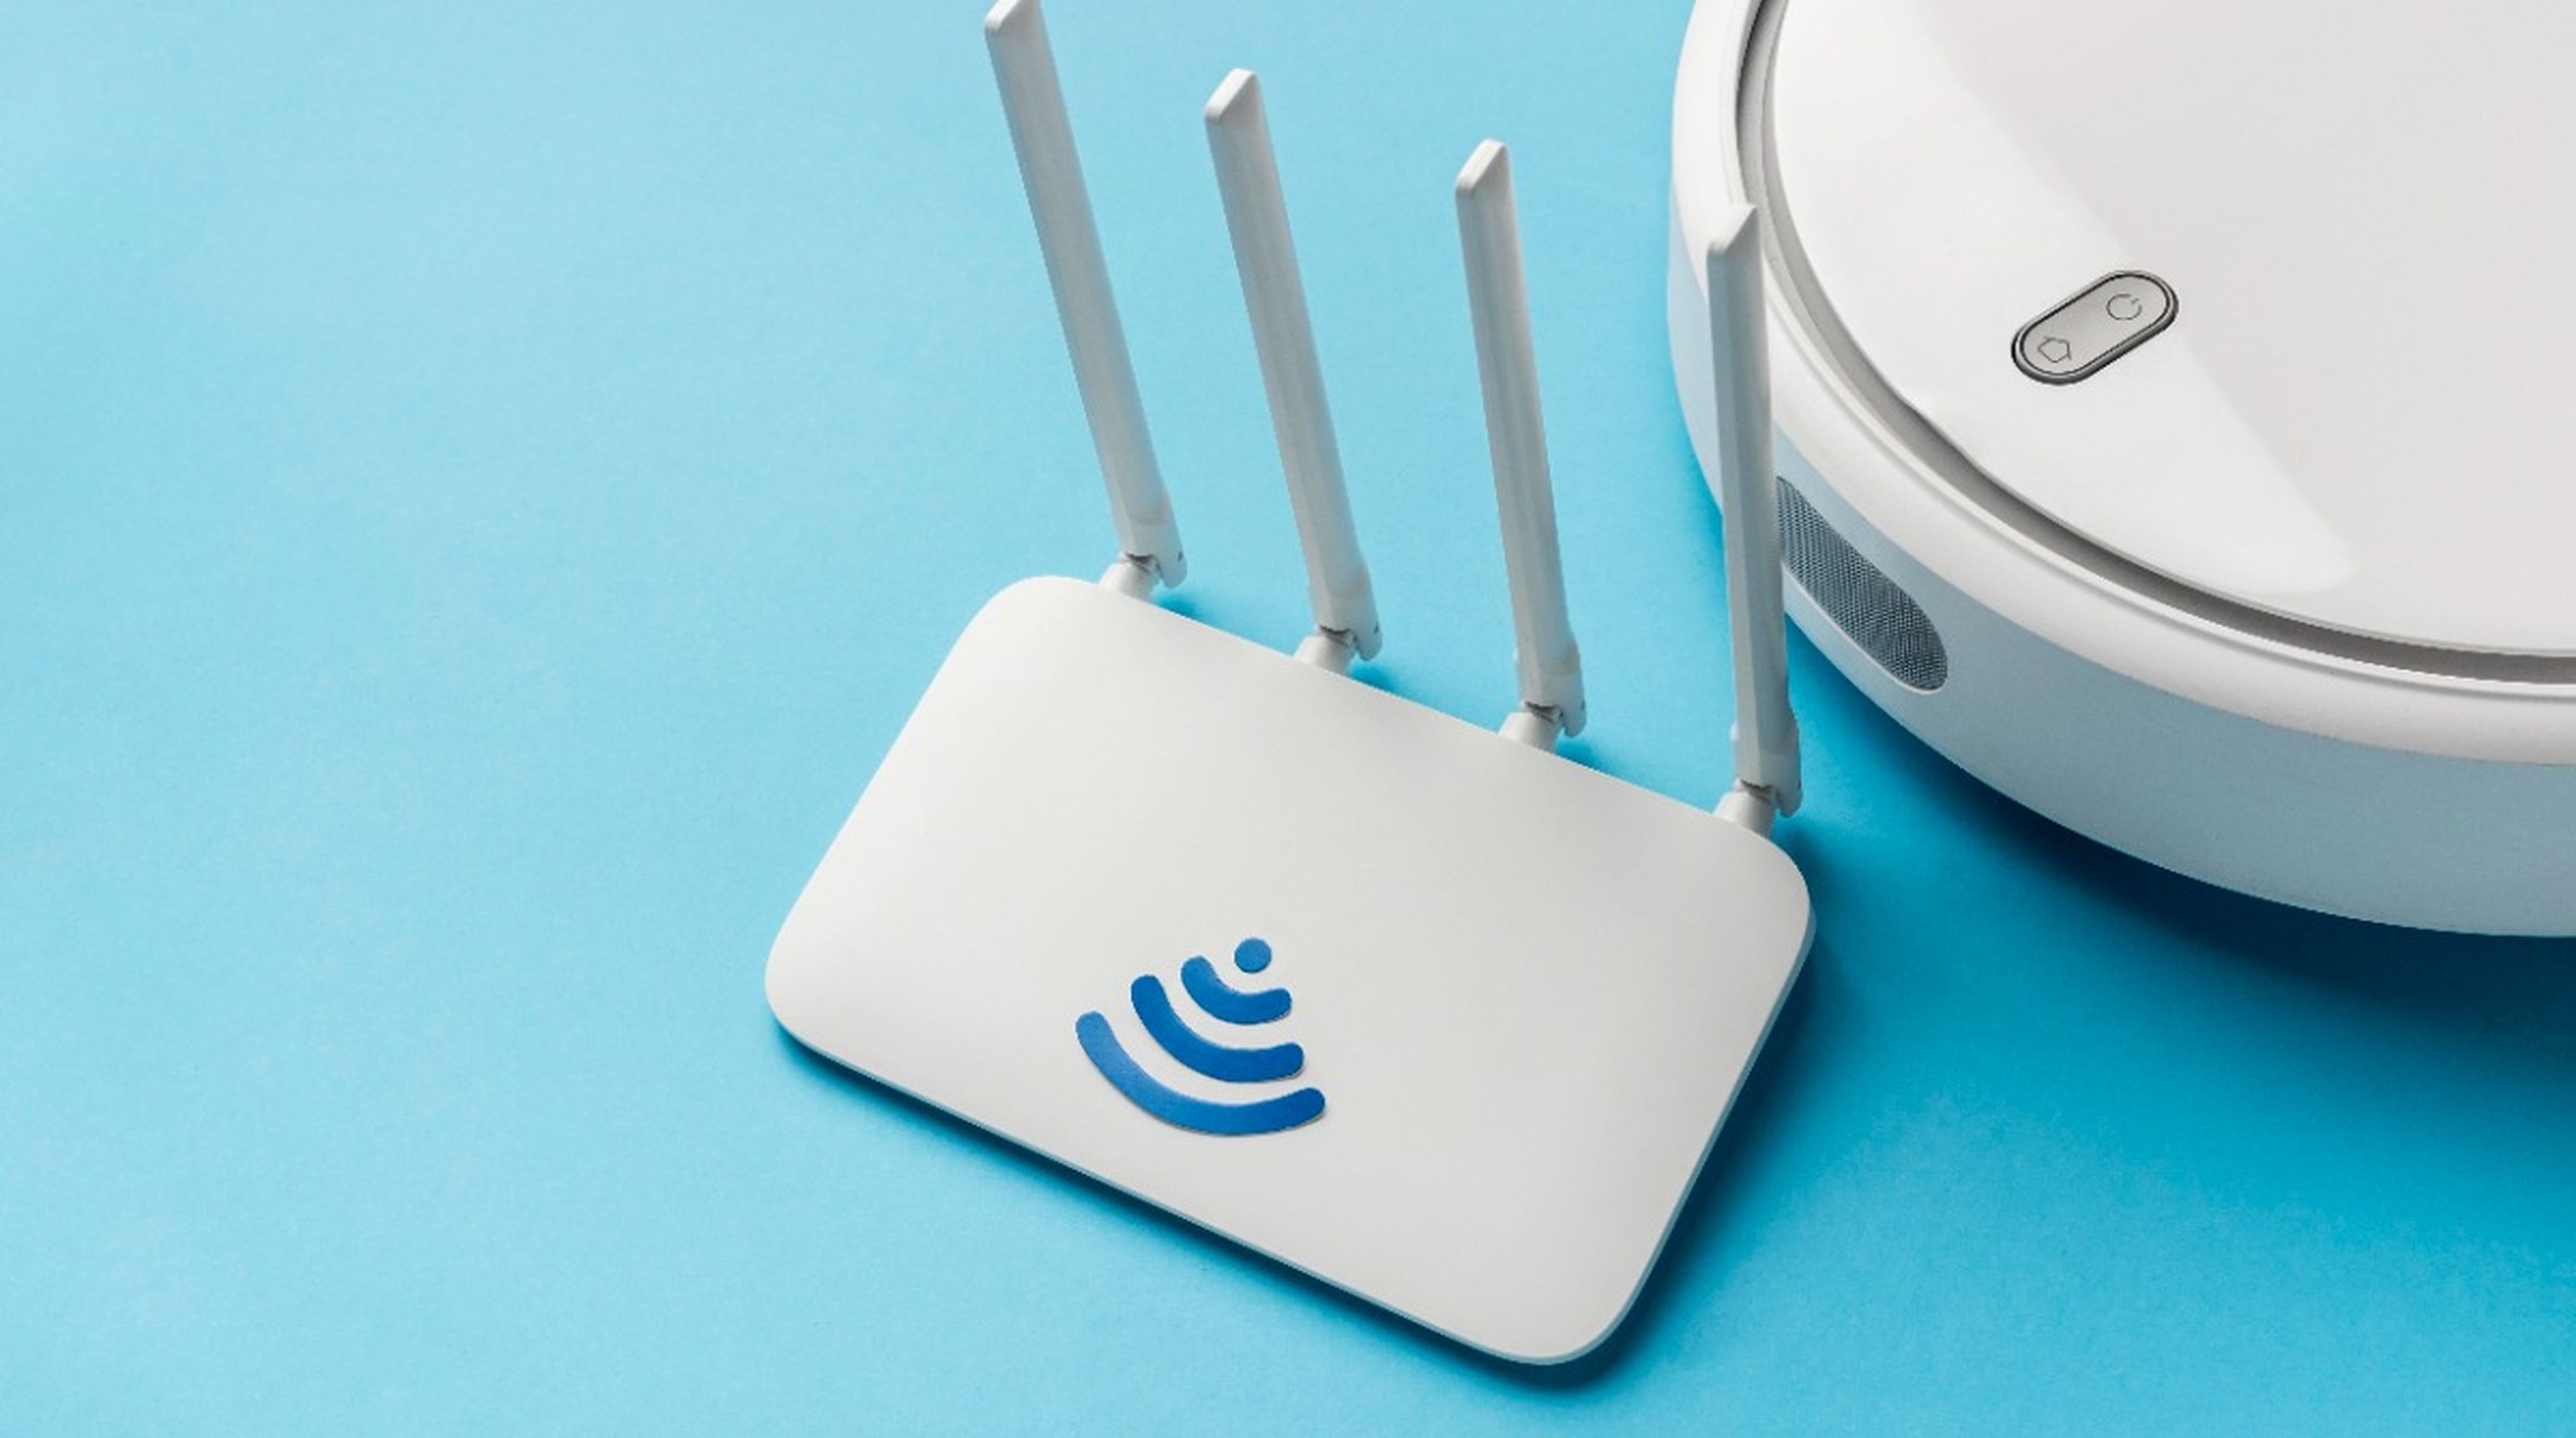 10 objects that we all have at home that you should never place your WiFi router next to